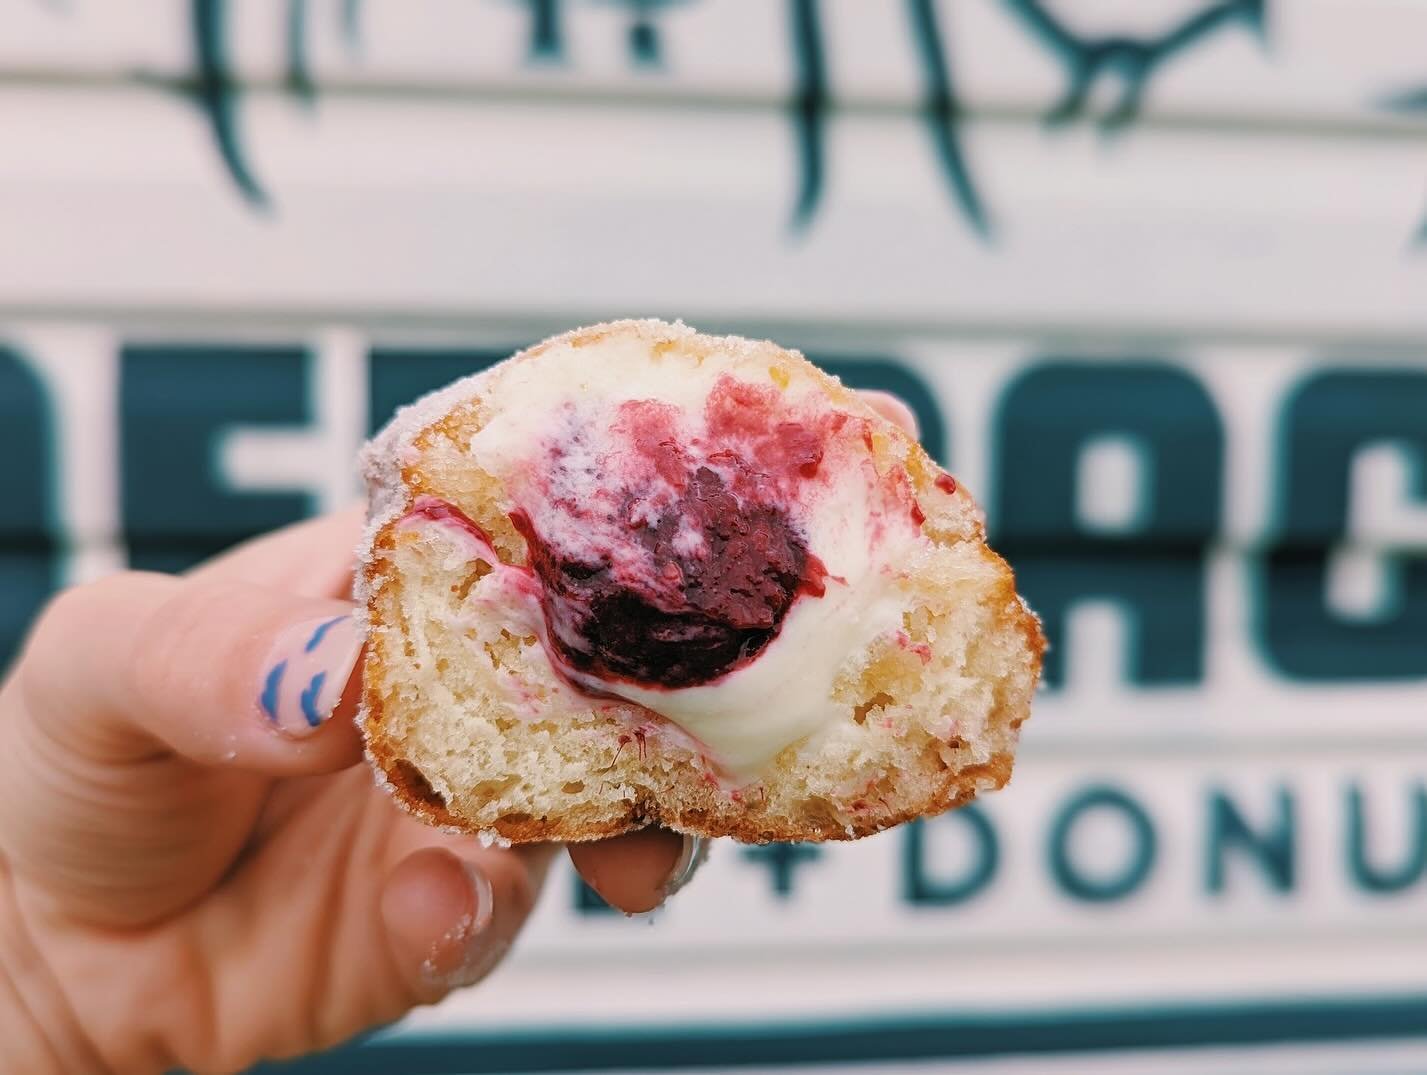 In case you&rsquo;ve been living under a rock, we&rsquo;re dropping a new summer menu tomorrow and you won&rsquo;t believe what we&rsquo;re bringing back 👀

Re-introducing the 🍓 BERRY SPRINGER 🫐. A potato puff stuffed with a berry cheesecake filli